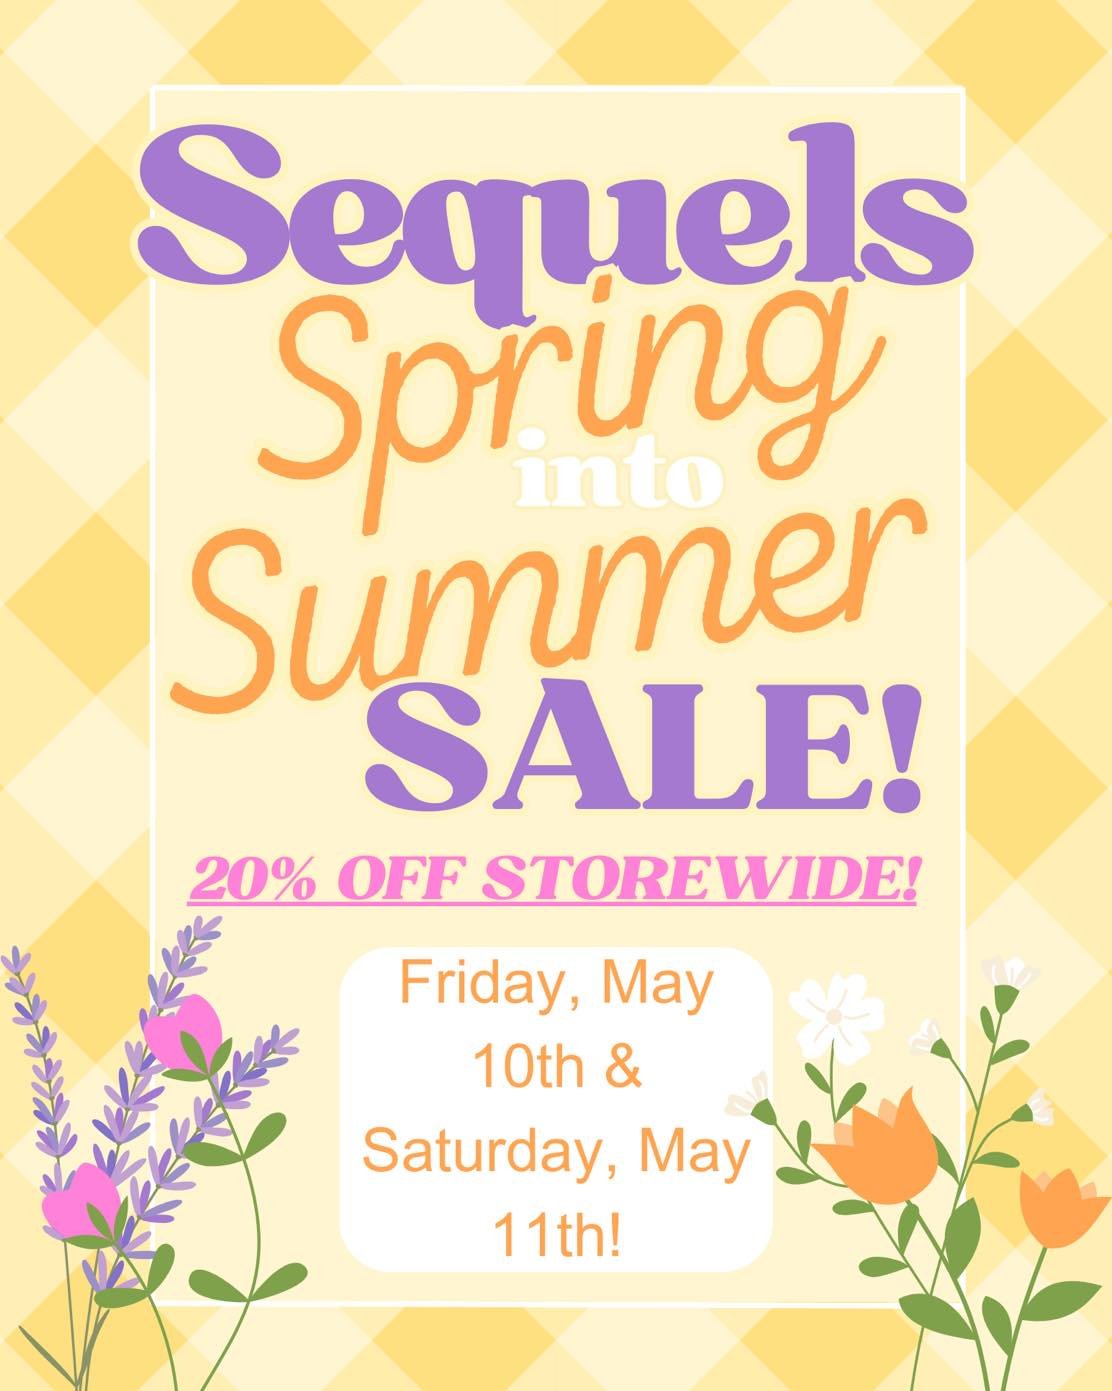 Sequels Spring into Summer SALE is just a week away!!🌷🛍️

FRIDAY, MAY 10th &amp; SATURDAY, MAY 11th our ENTIRE STORE will be 20% OFF!!😱 Don&rsquo;t miss out this Mother&rsquo;s Day weekend, ALL NEW Sequels Exclusive Accessories perfect for the sum